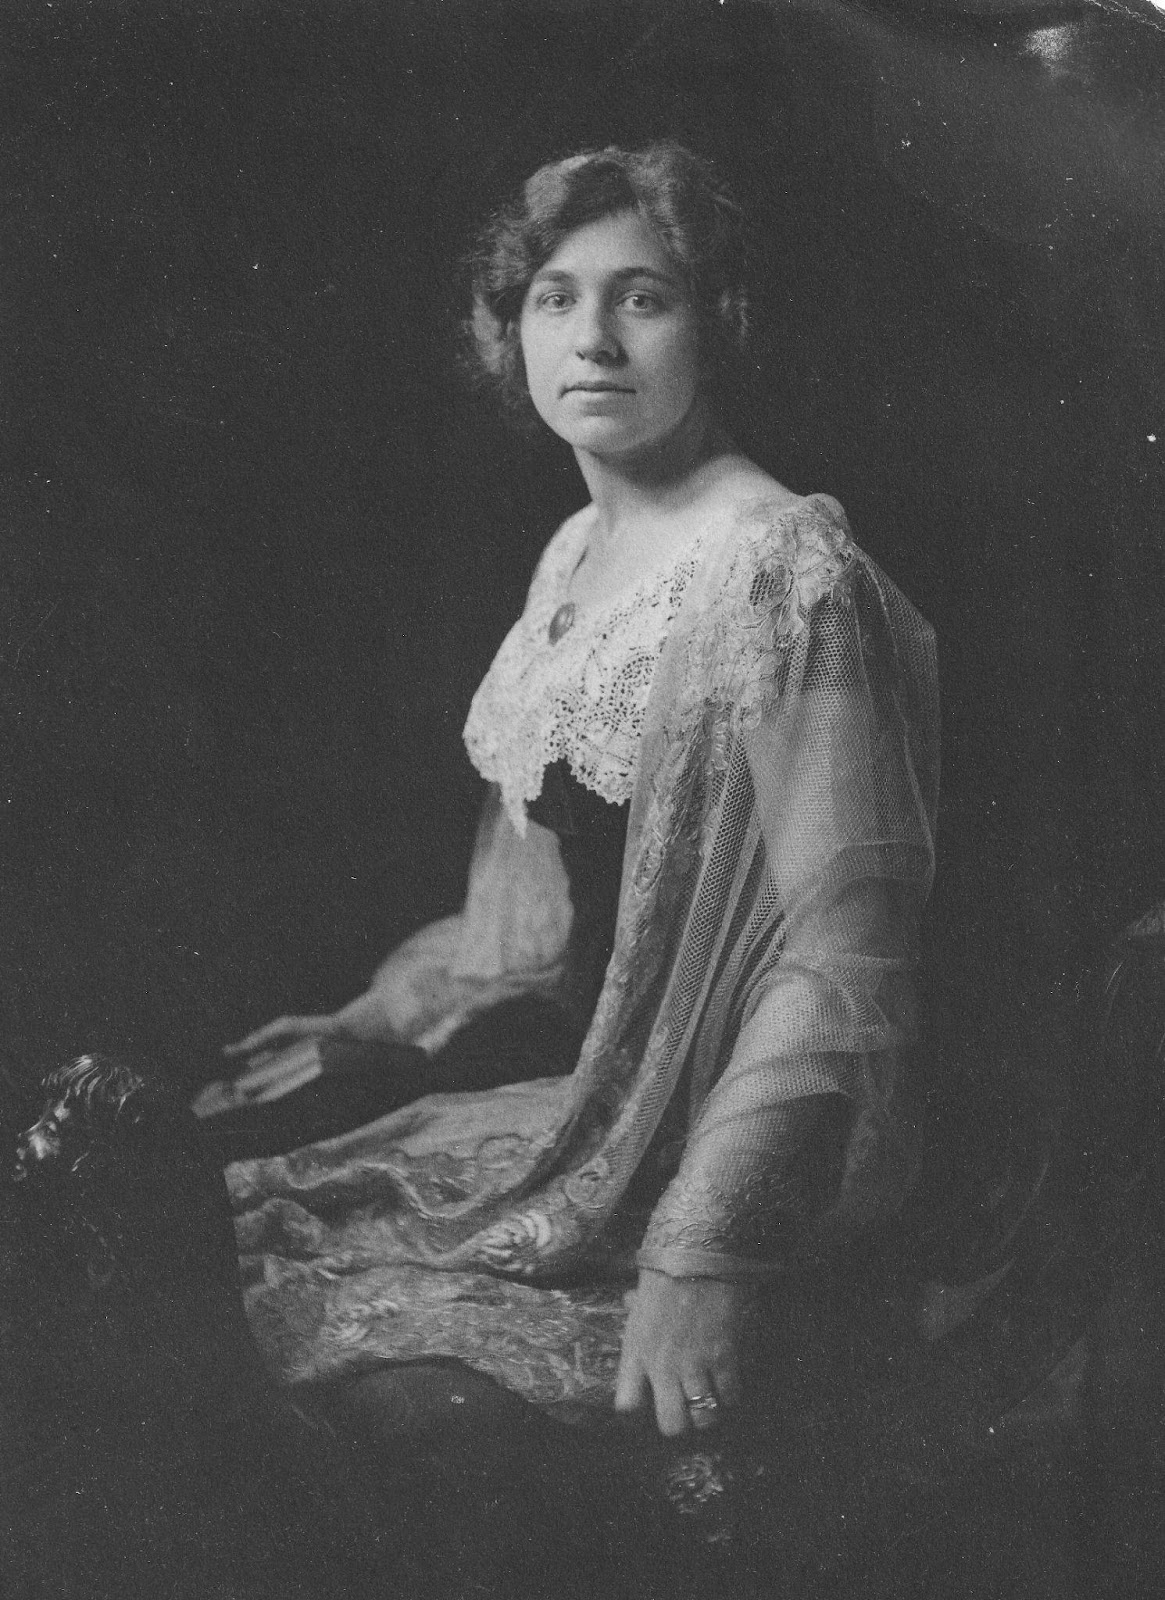 Mildred Couper, photo provided by Greta Couper